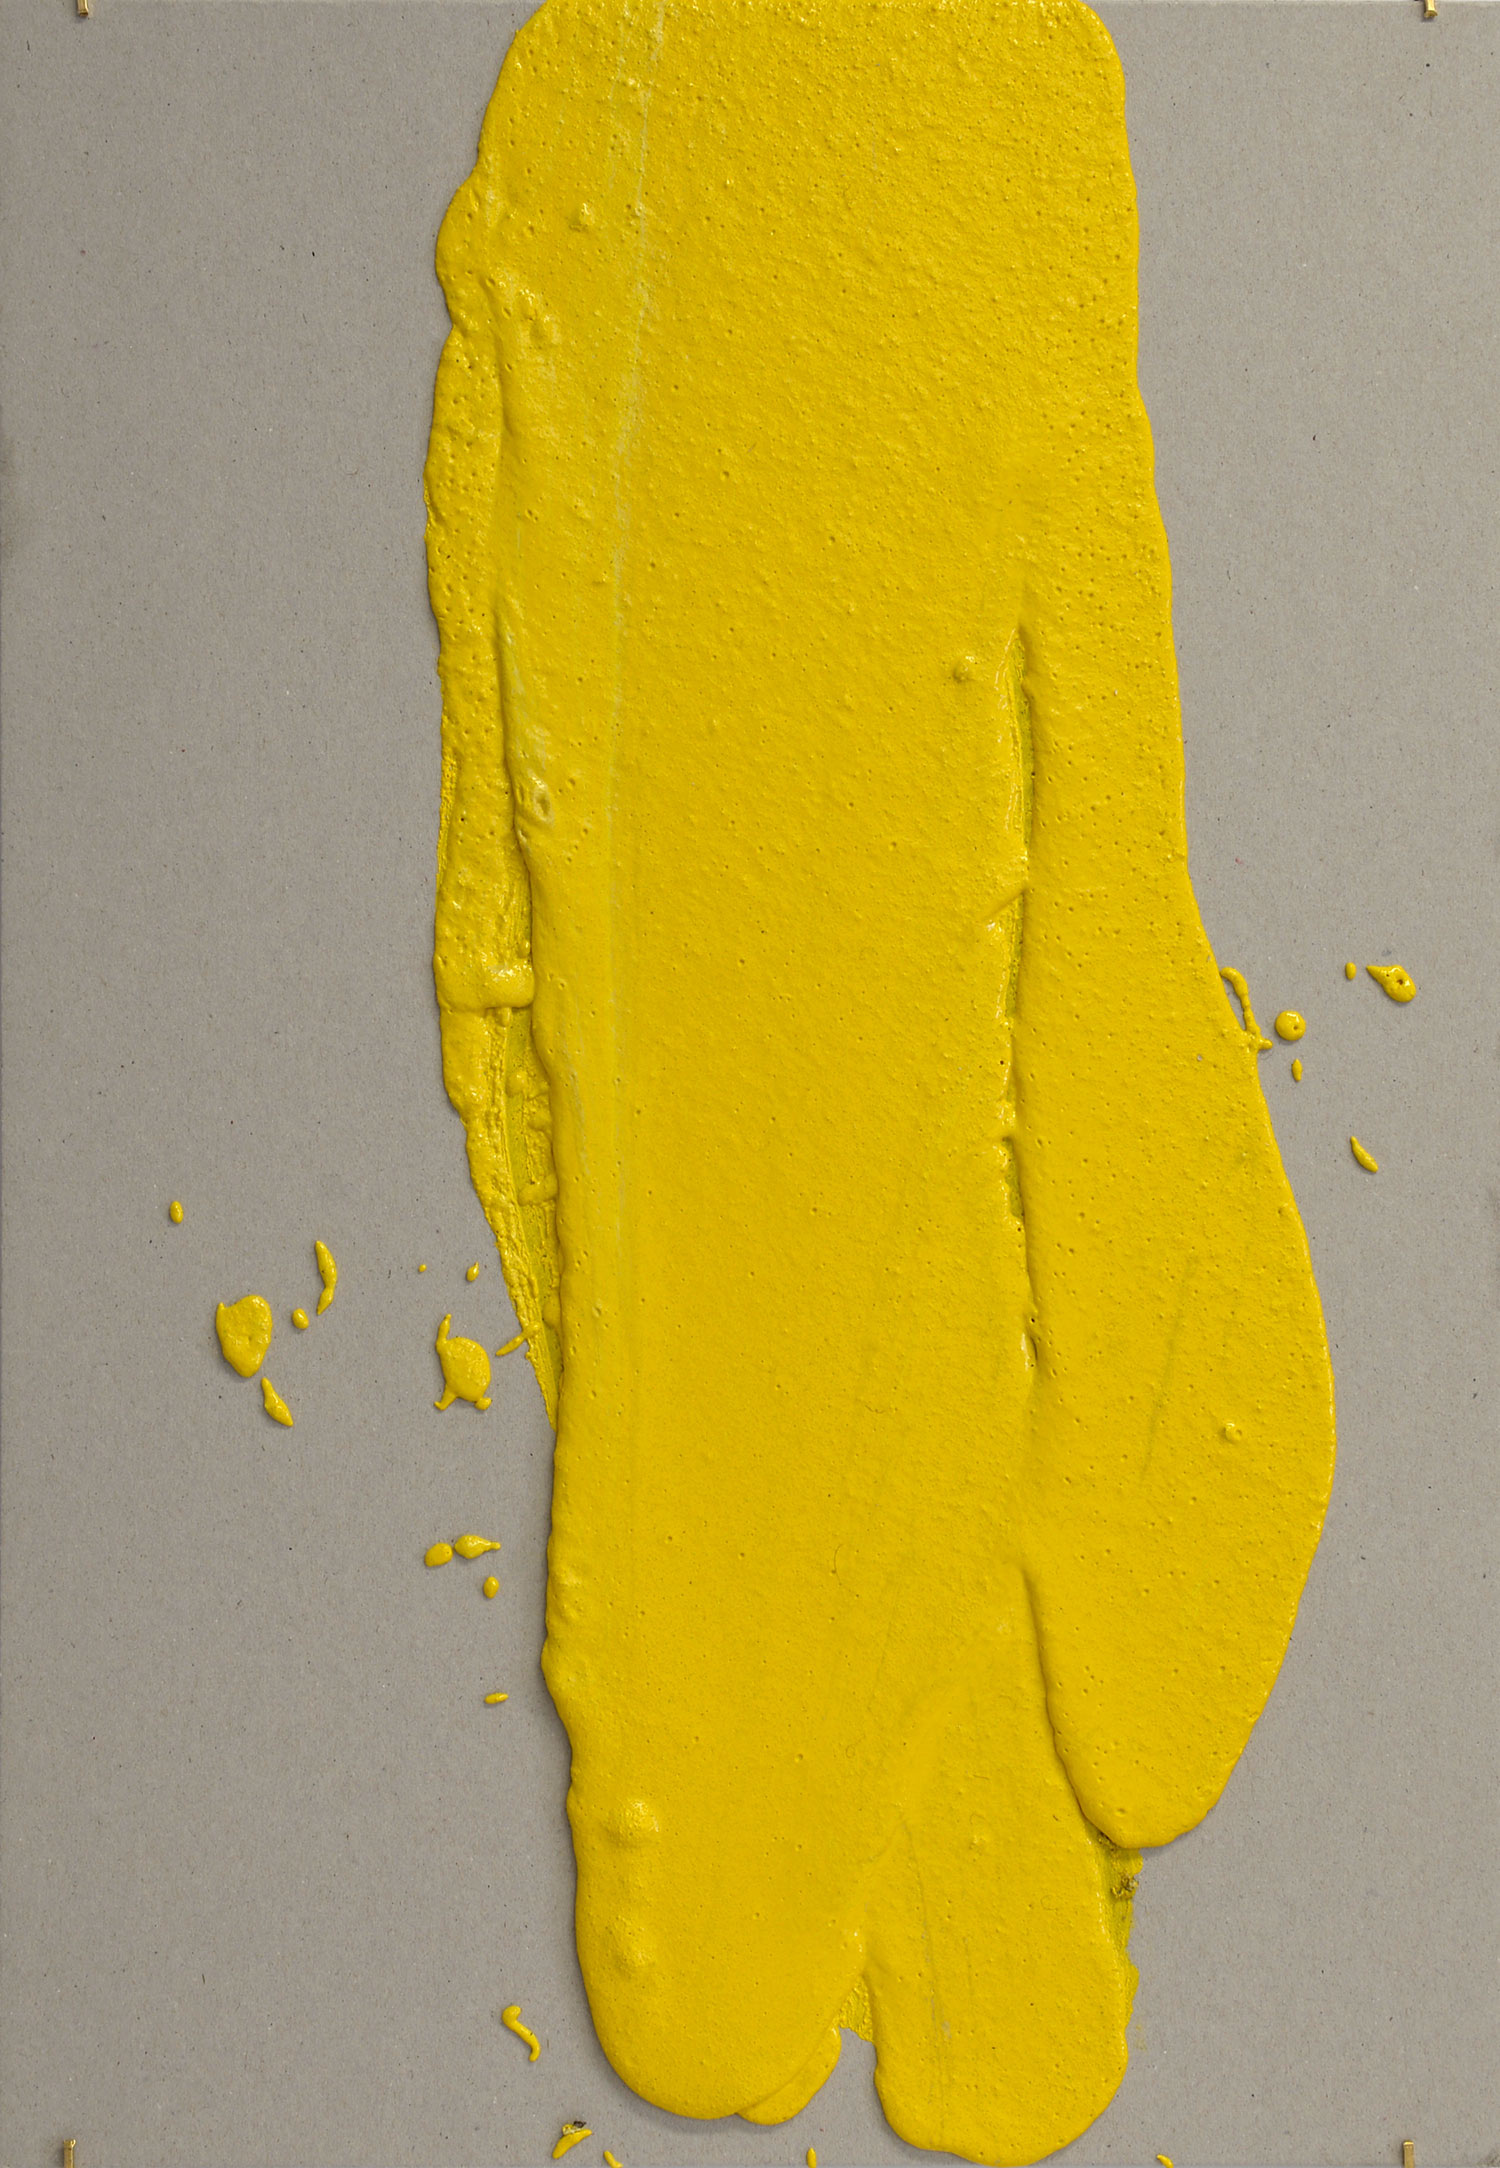   4in (section) (W), 2.27mm (T), Yellow, Random mark, Hand marking, Lewis St, Btw Delancey St - Grand St,  2018  Thermoplastic paint, reflective glass particles on grey board 35cm x 50cm 